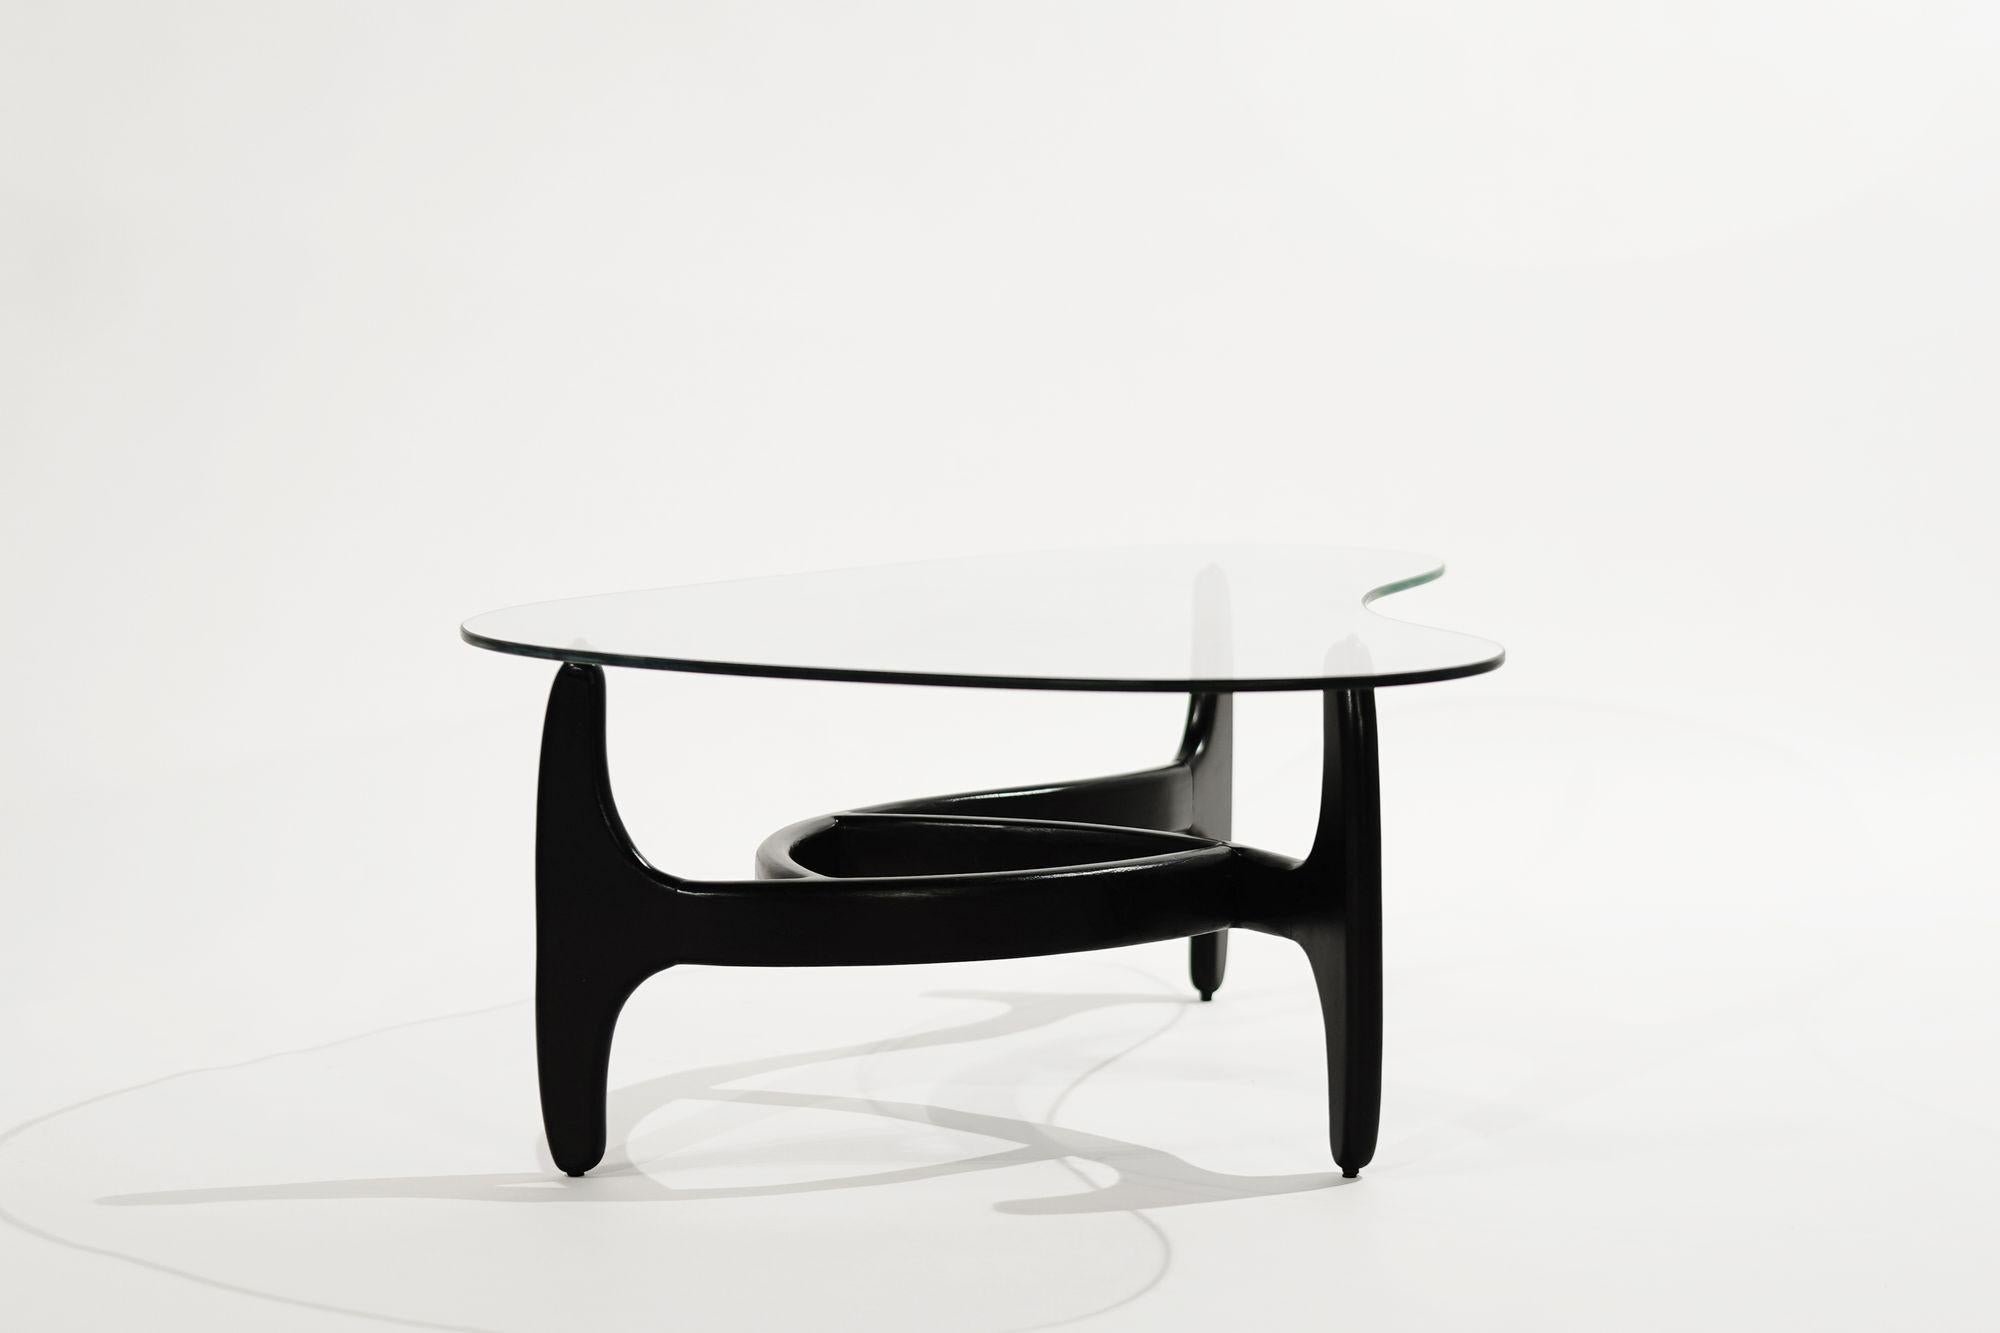 American Sculptural Coffee Table by Adrian Pearsall, C. 1950s